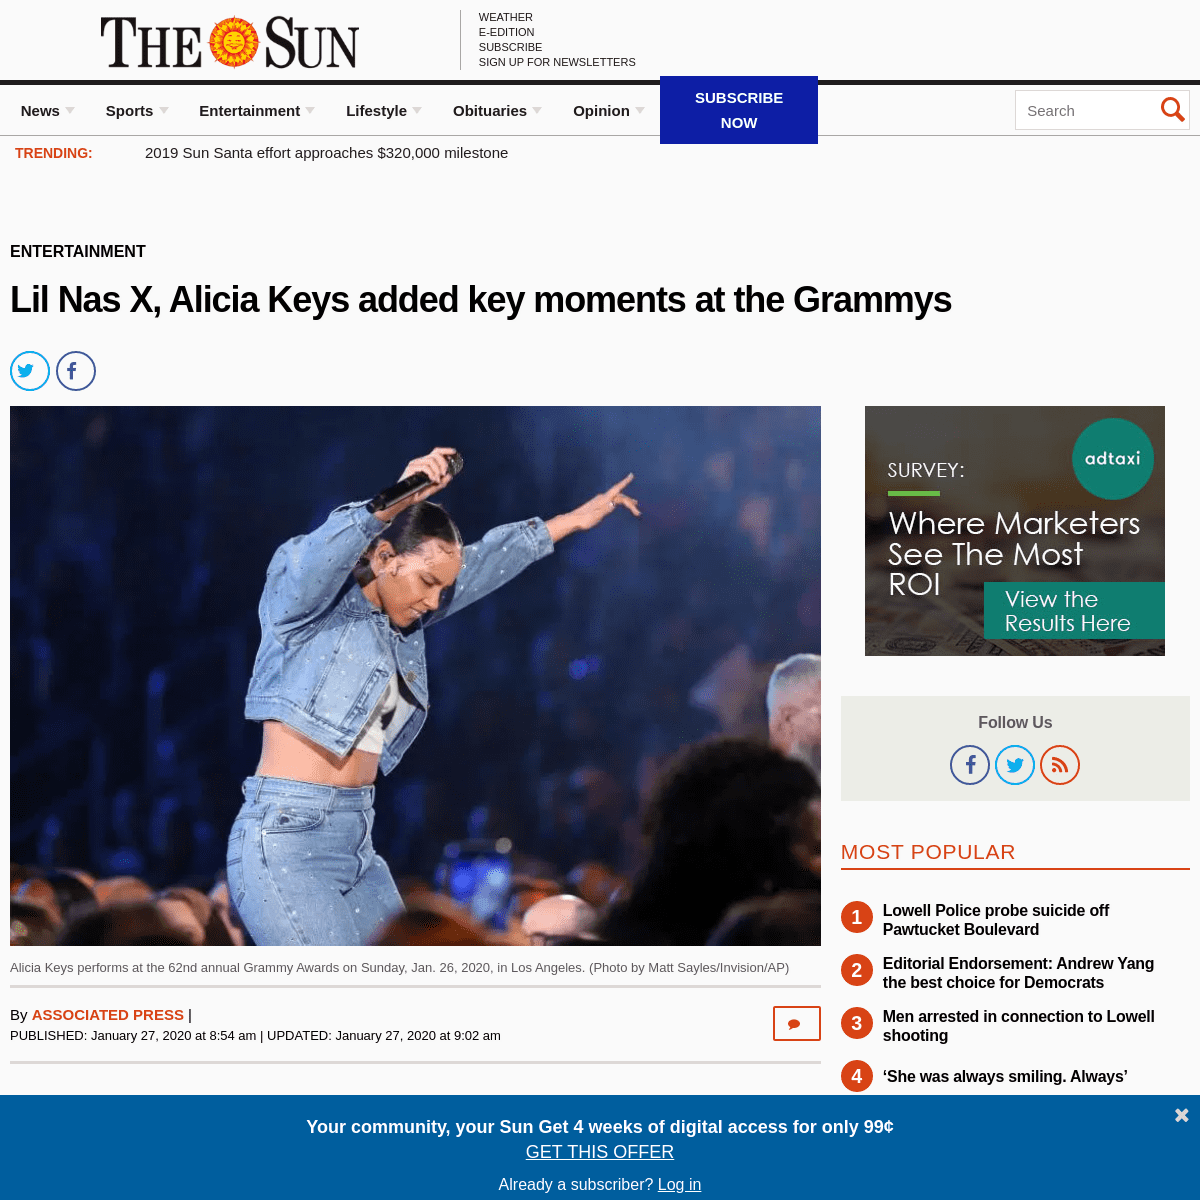 A complete backup of www.lowellsun.com/lil-nas-x-alicia-keys-added-key-moments-at-the-grammys